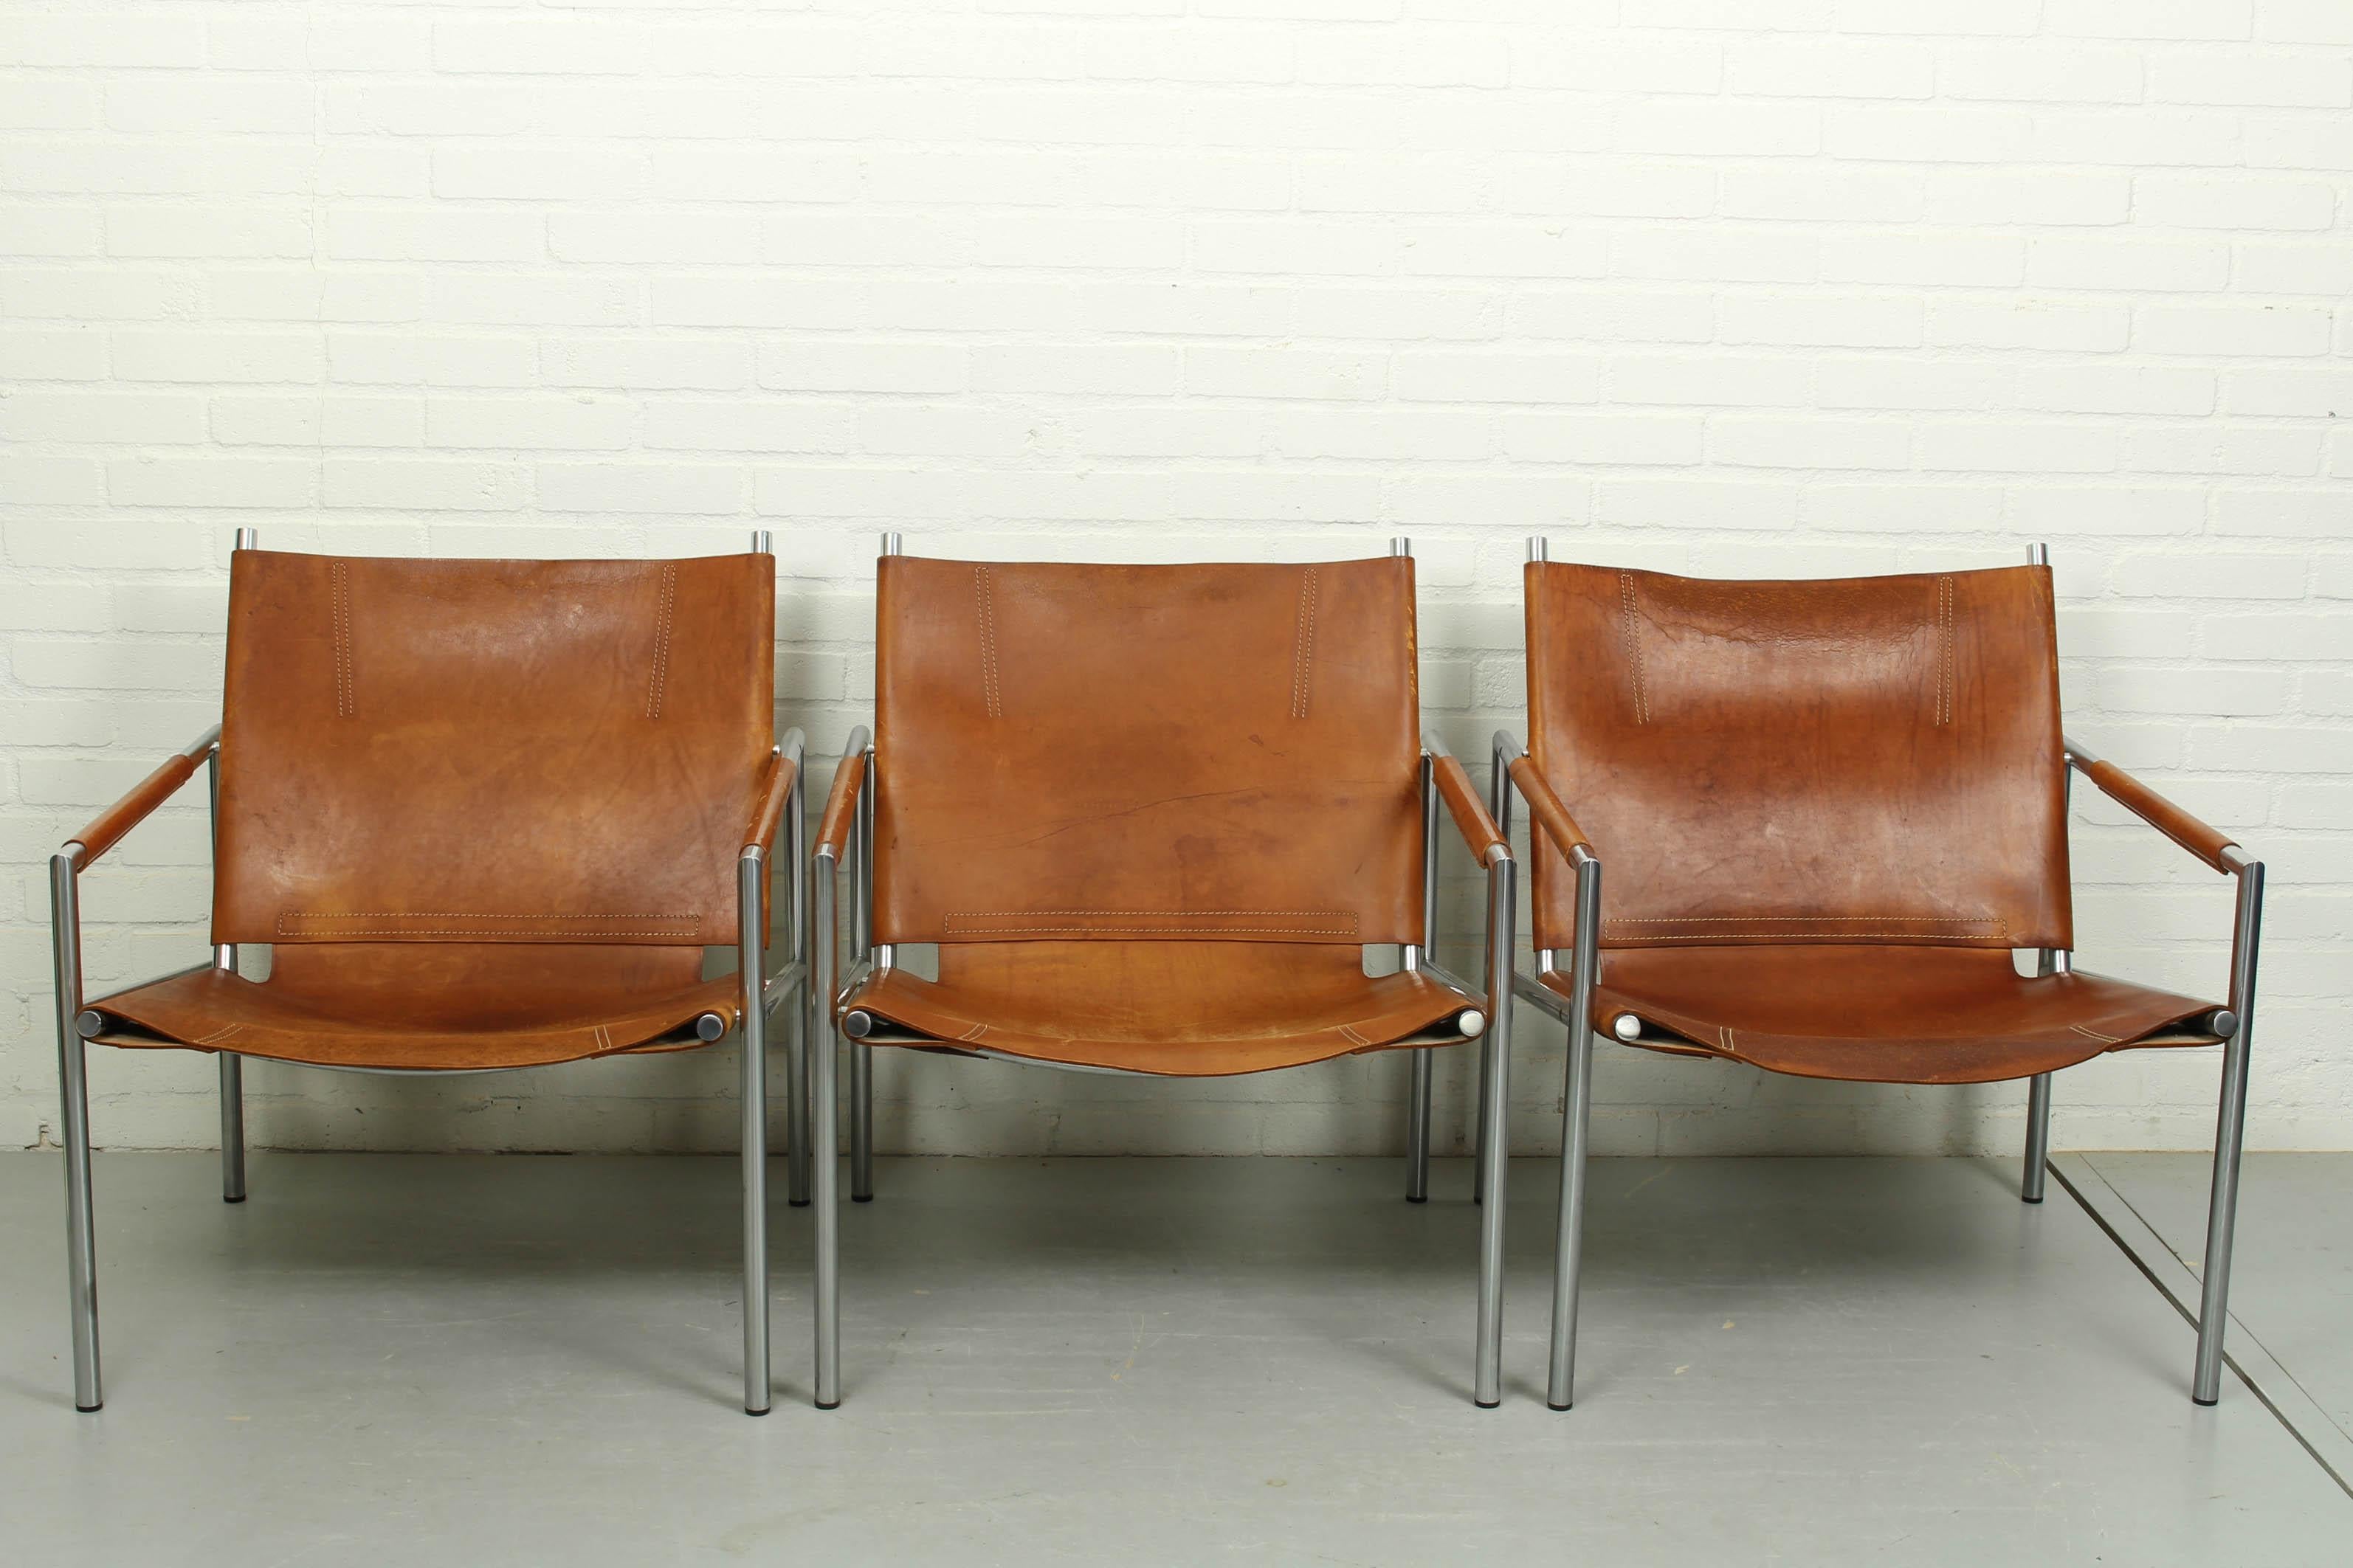 Lounge chair by Martin Visser for 't Spectrum, model SZ02. These lounge chairs are completely original, leather with great patina in accordance with age. Frames show some wear consistent with their age and use. 

Price is per 1 lounge chair (in